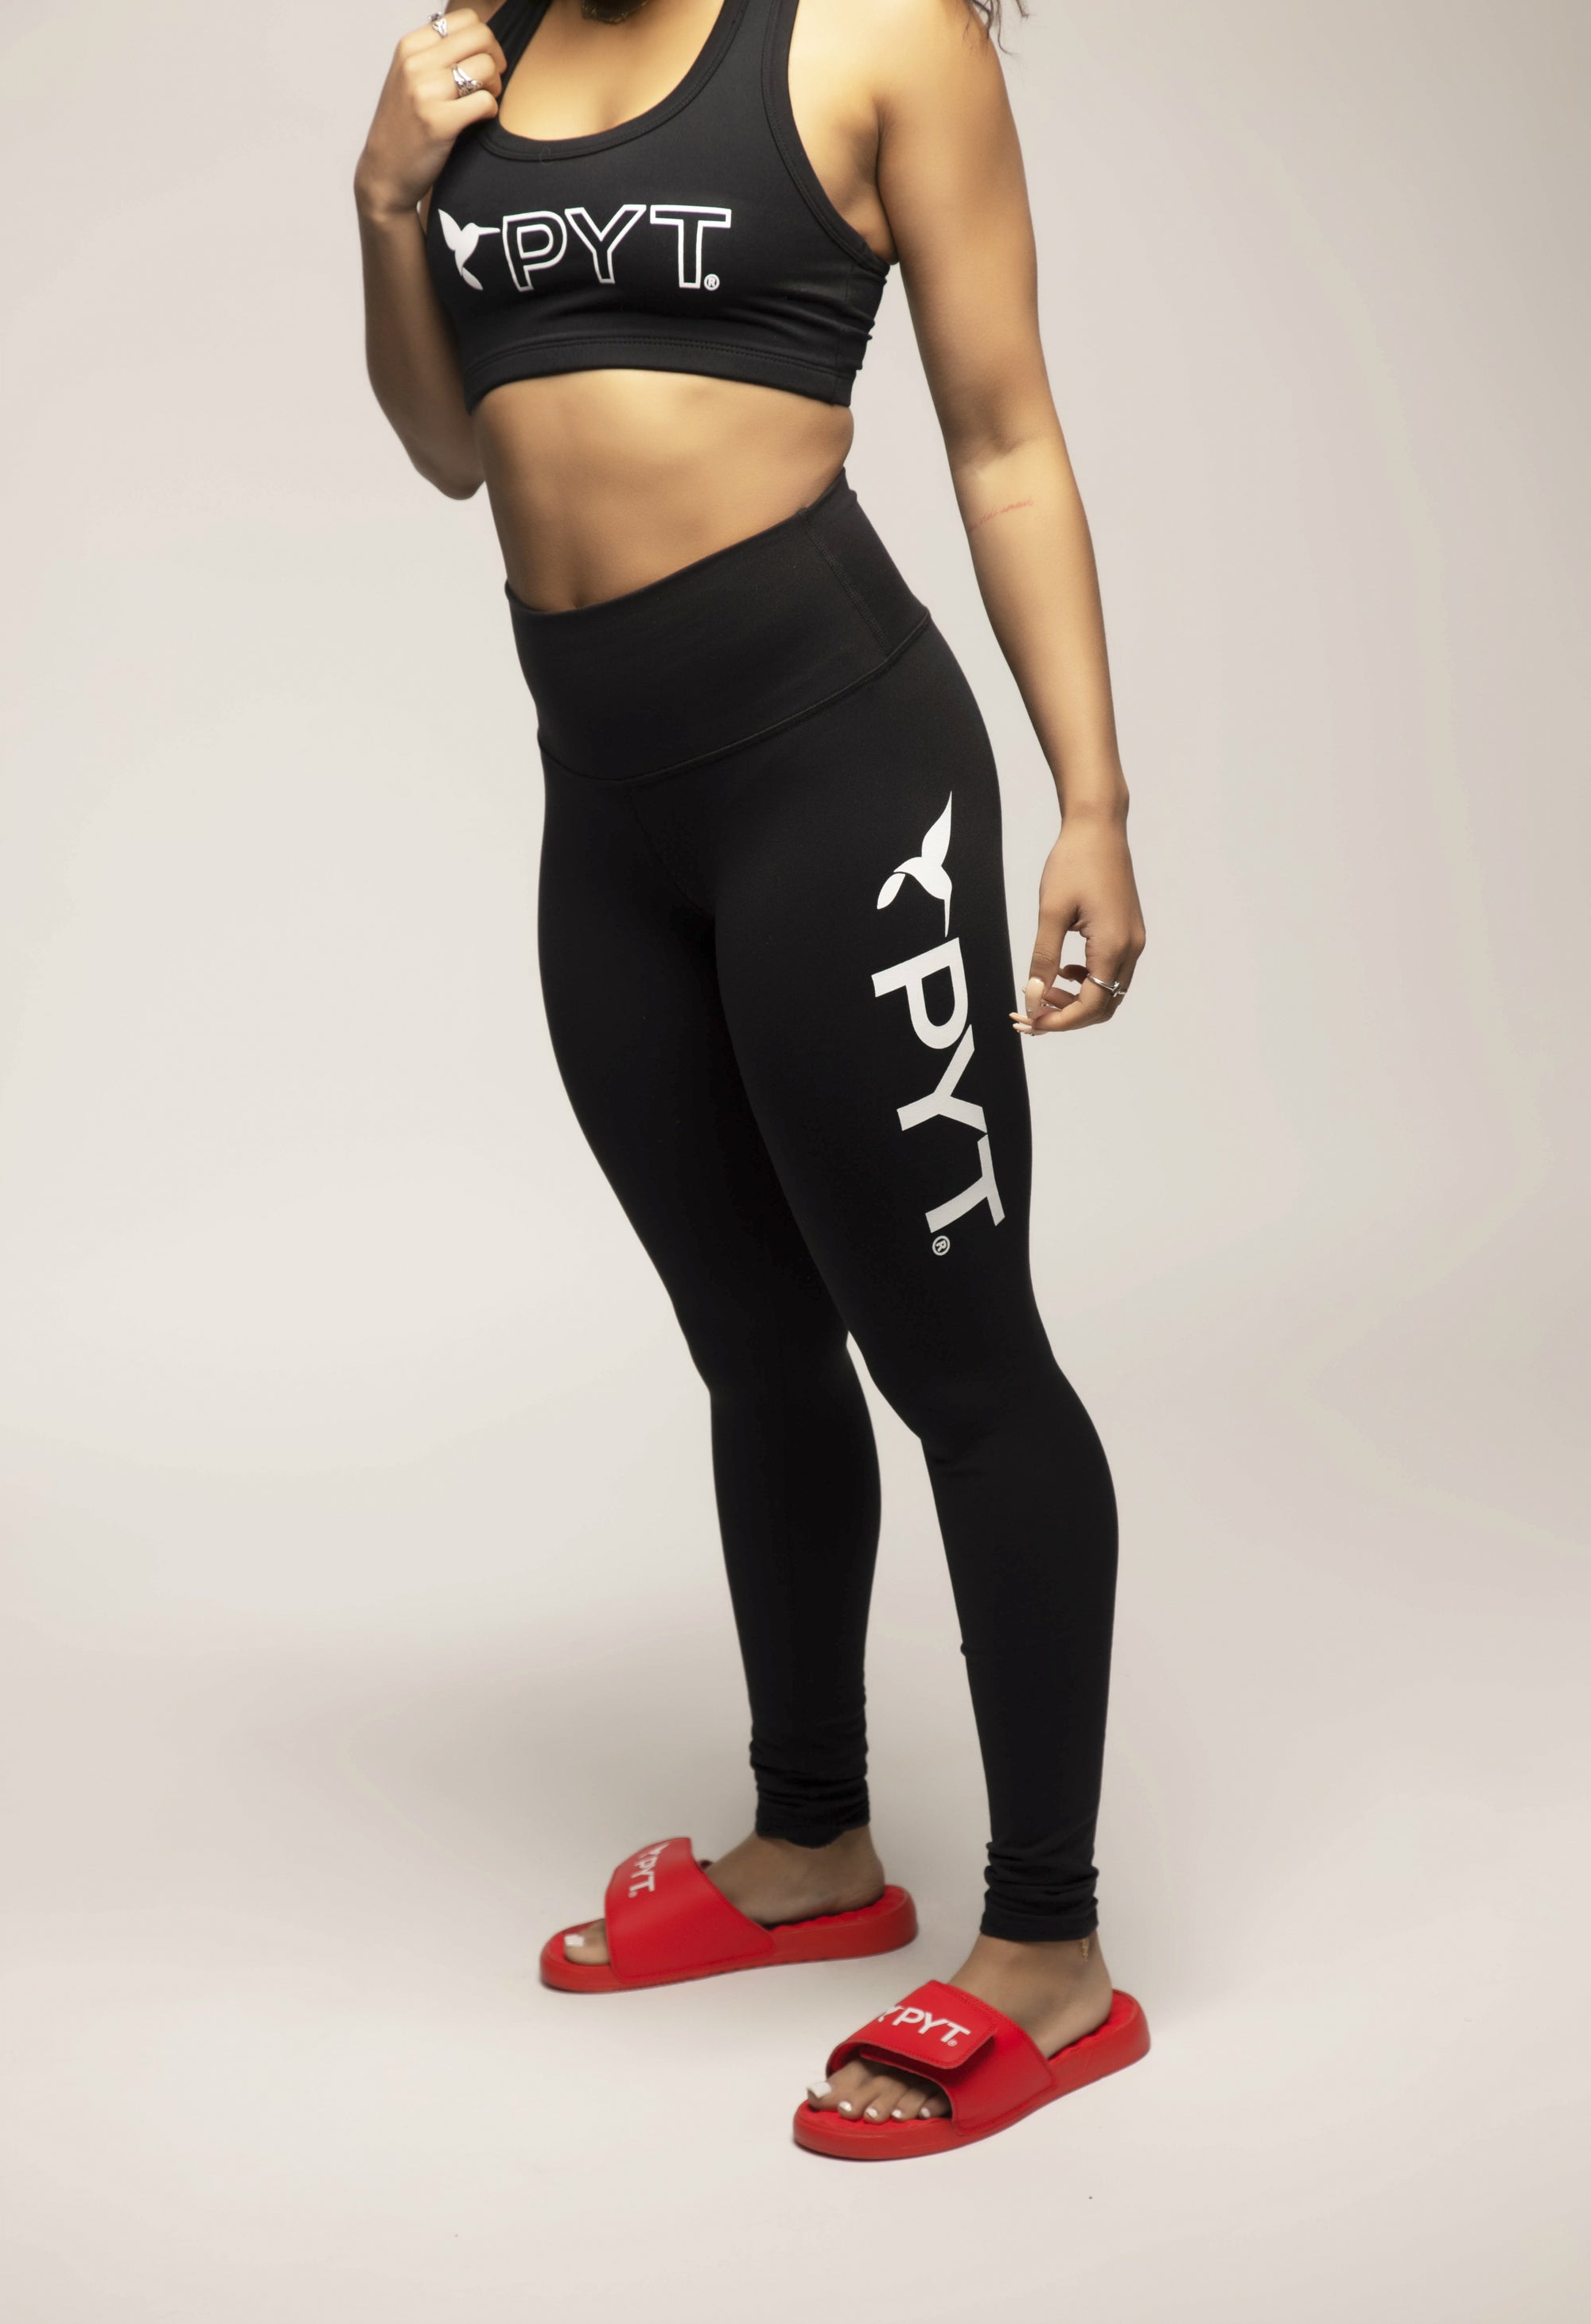 DKNY Nylon Workout Clothes: Women's Activewear & Athletic Wear